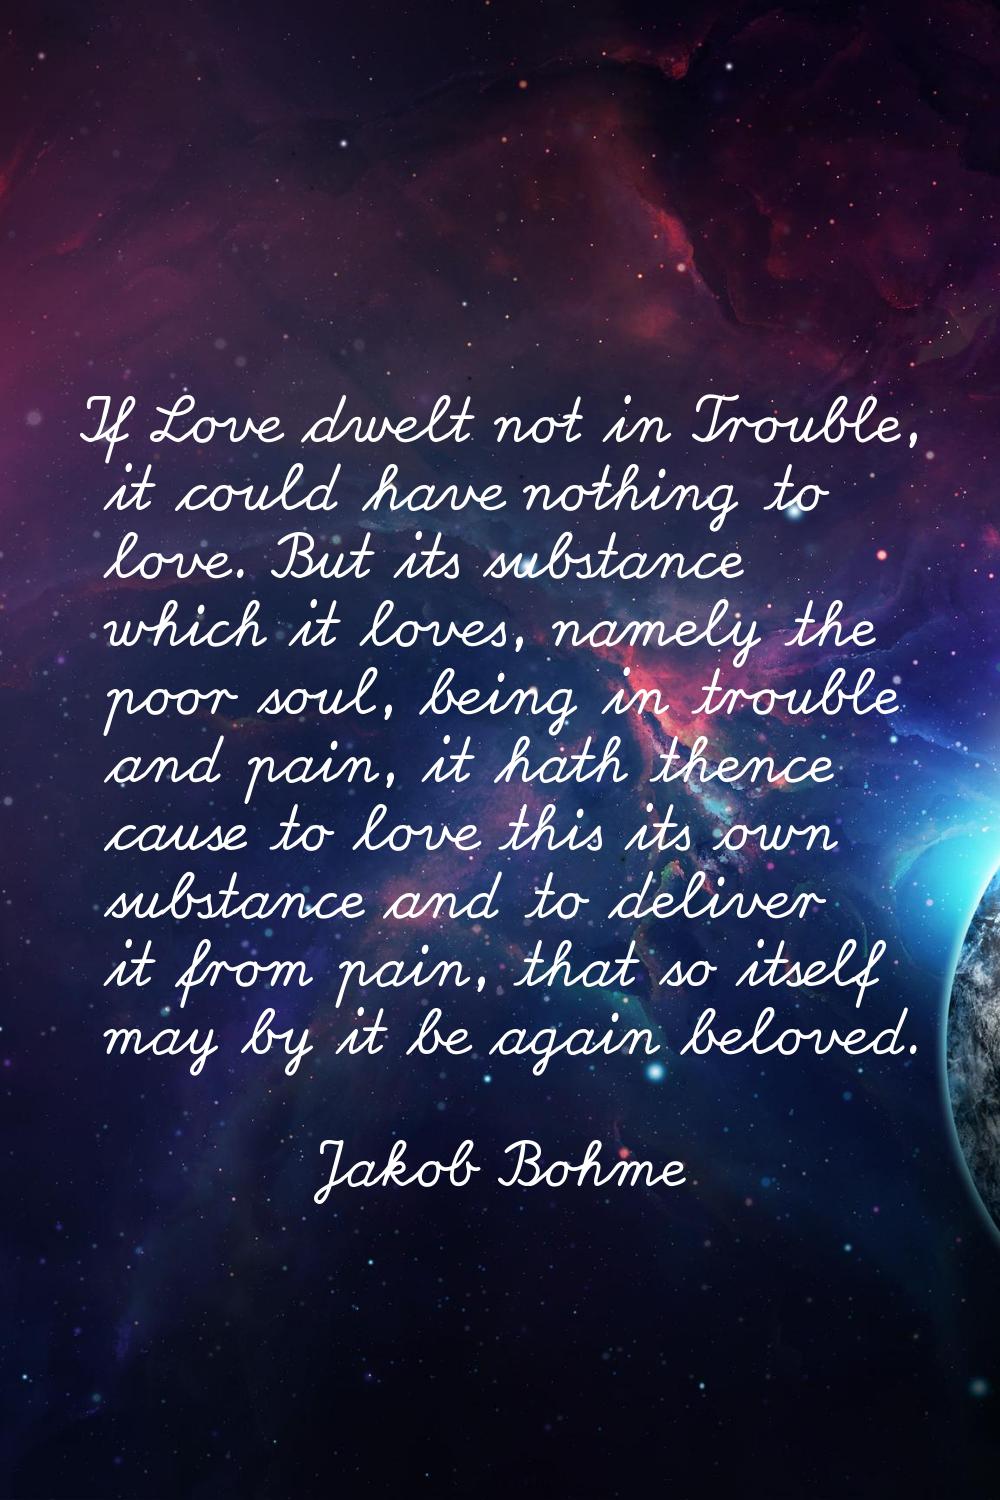 If Love dwelt not in Trouble, it could have nothing to love. But its substance which it loves, name